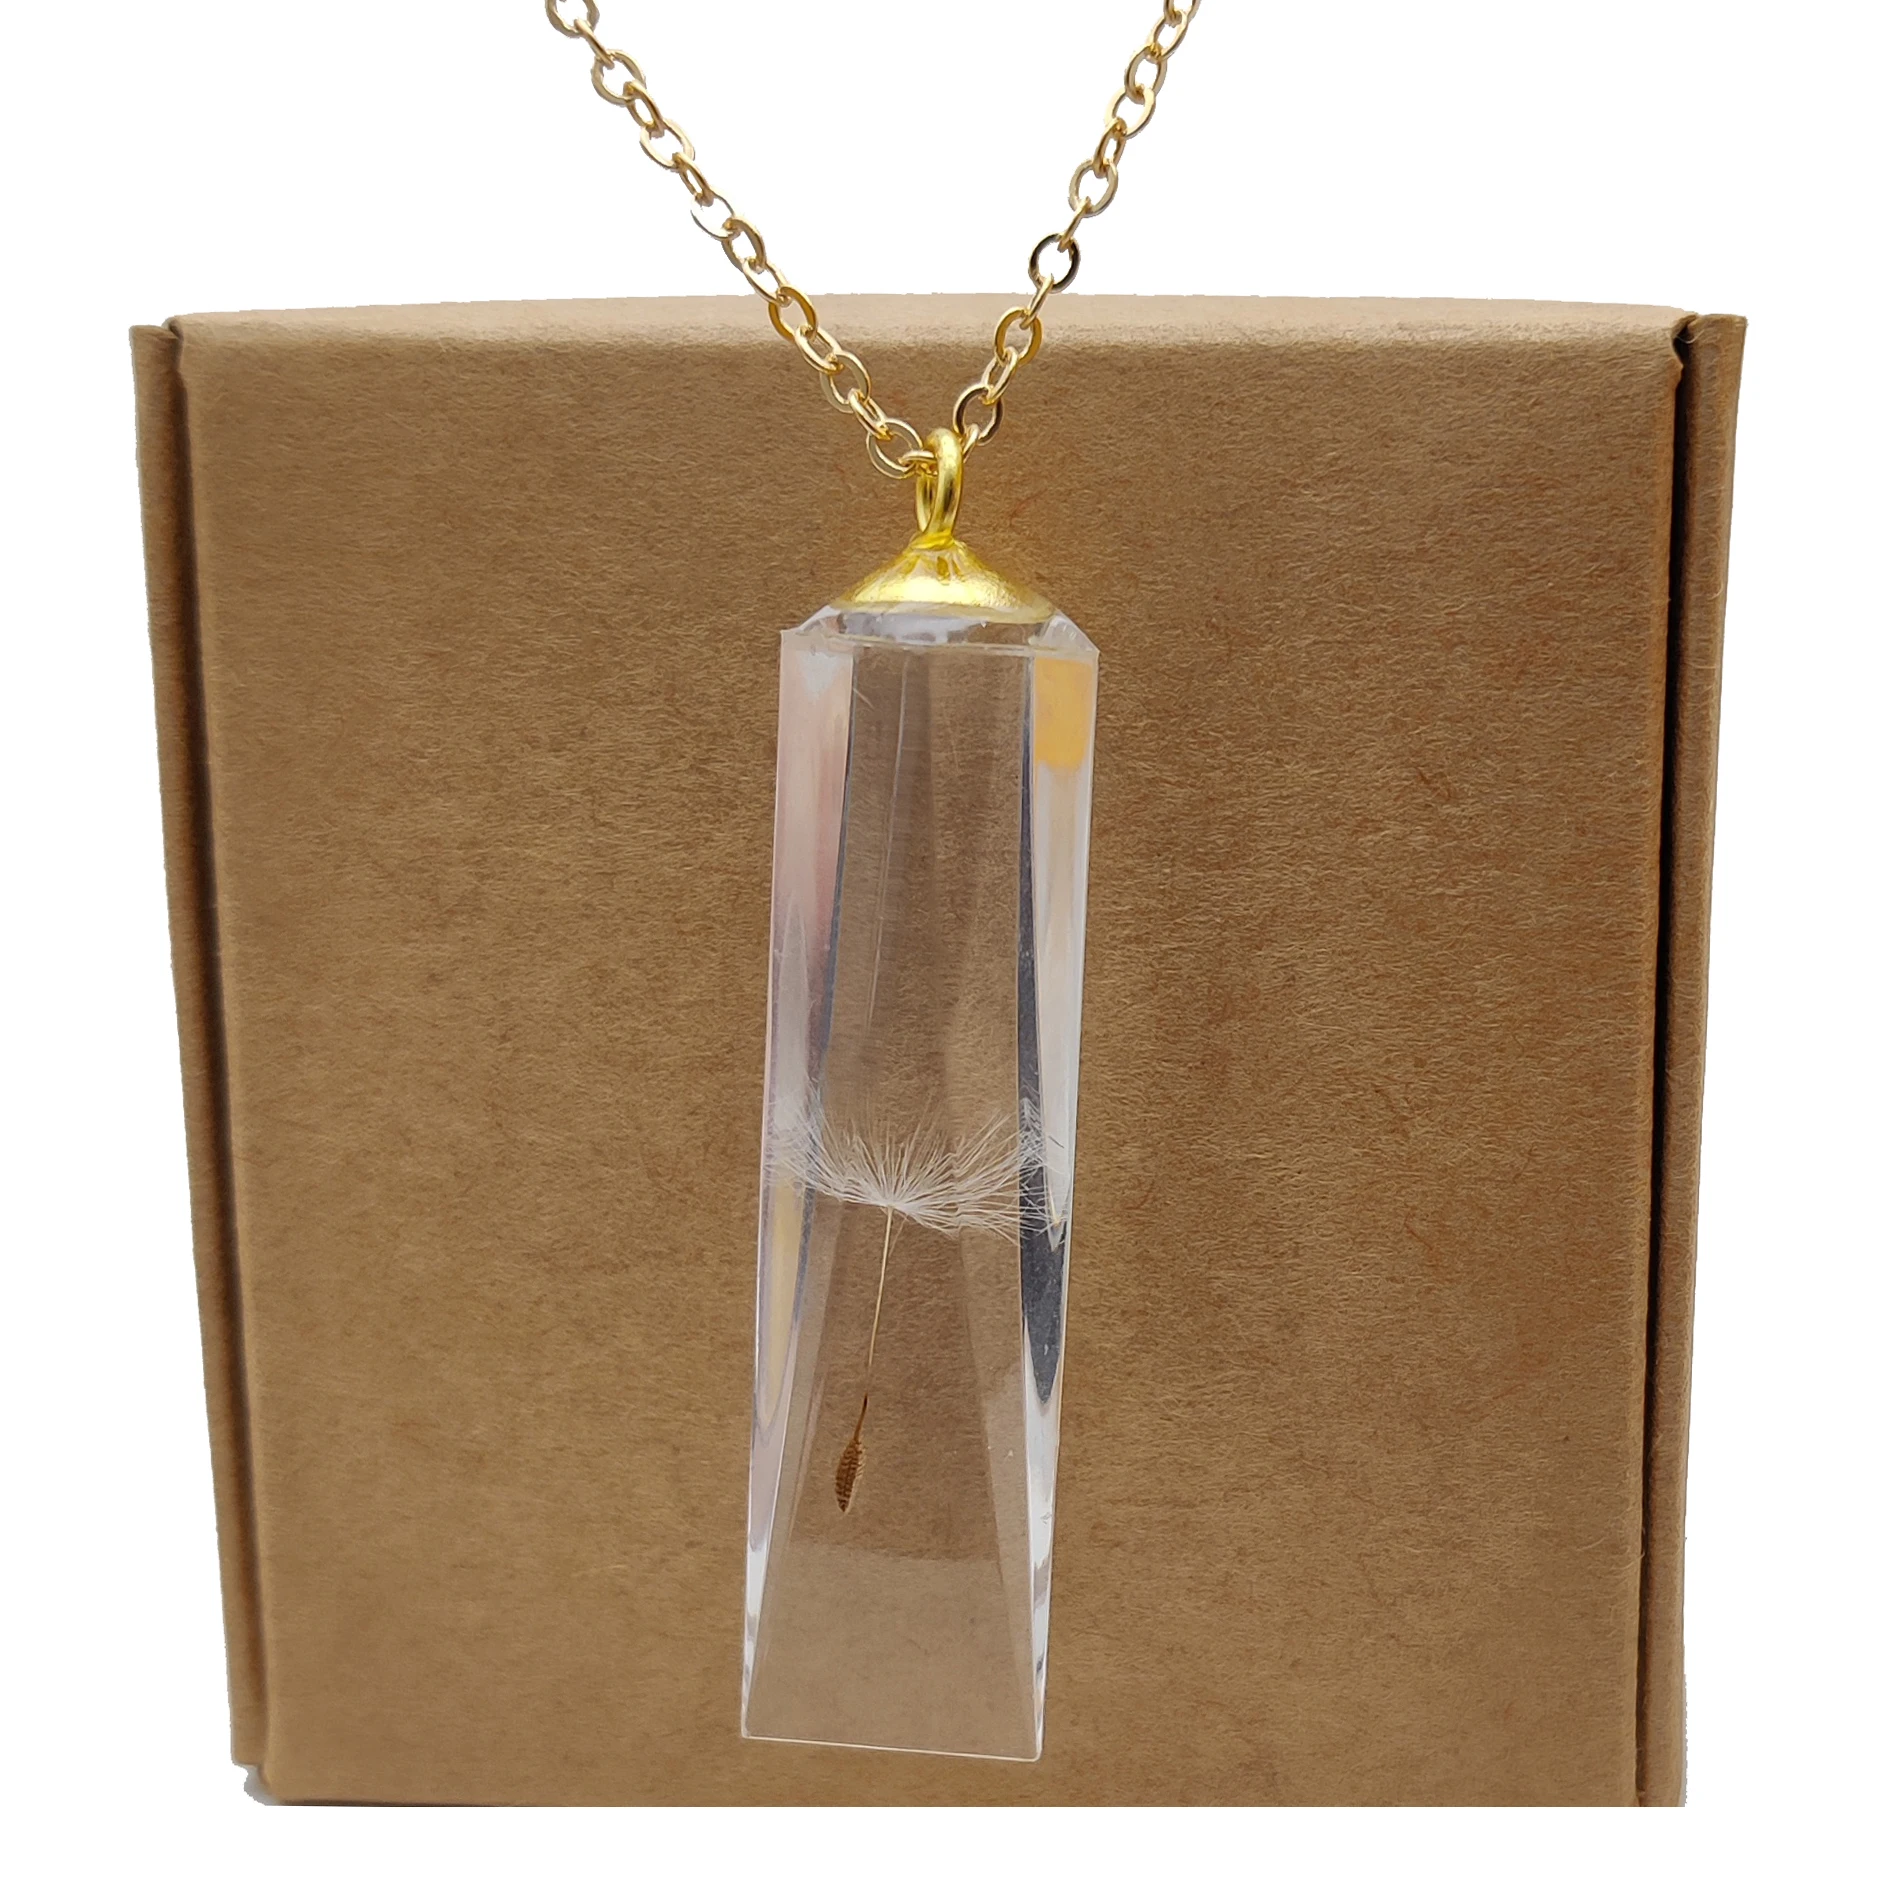 Dandelion Make a Wish Sliced Mirror Cuboid Resin Gold Color Pendant Chain Long Necklace Women Boho Jewelry Bohemian Handmade fashion professional women s autumn and winter new long sleeved suit unique temperament to make you unique